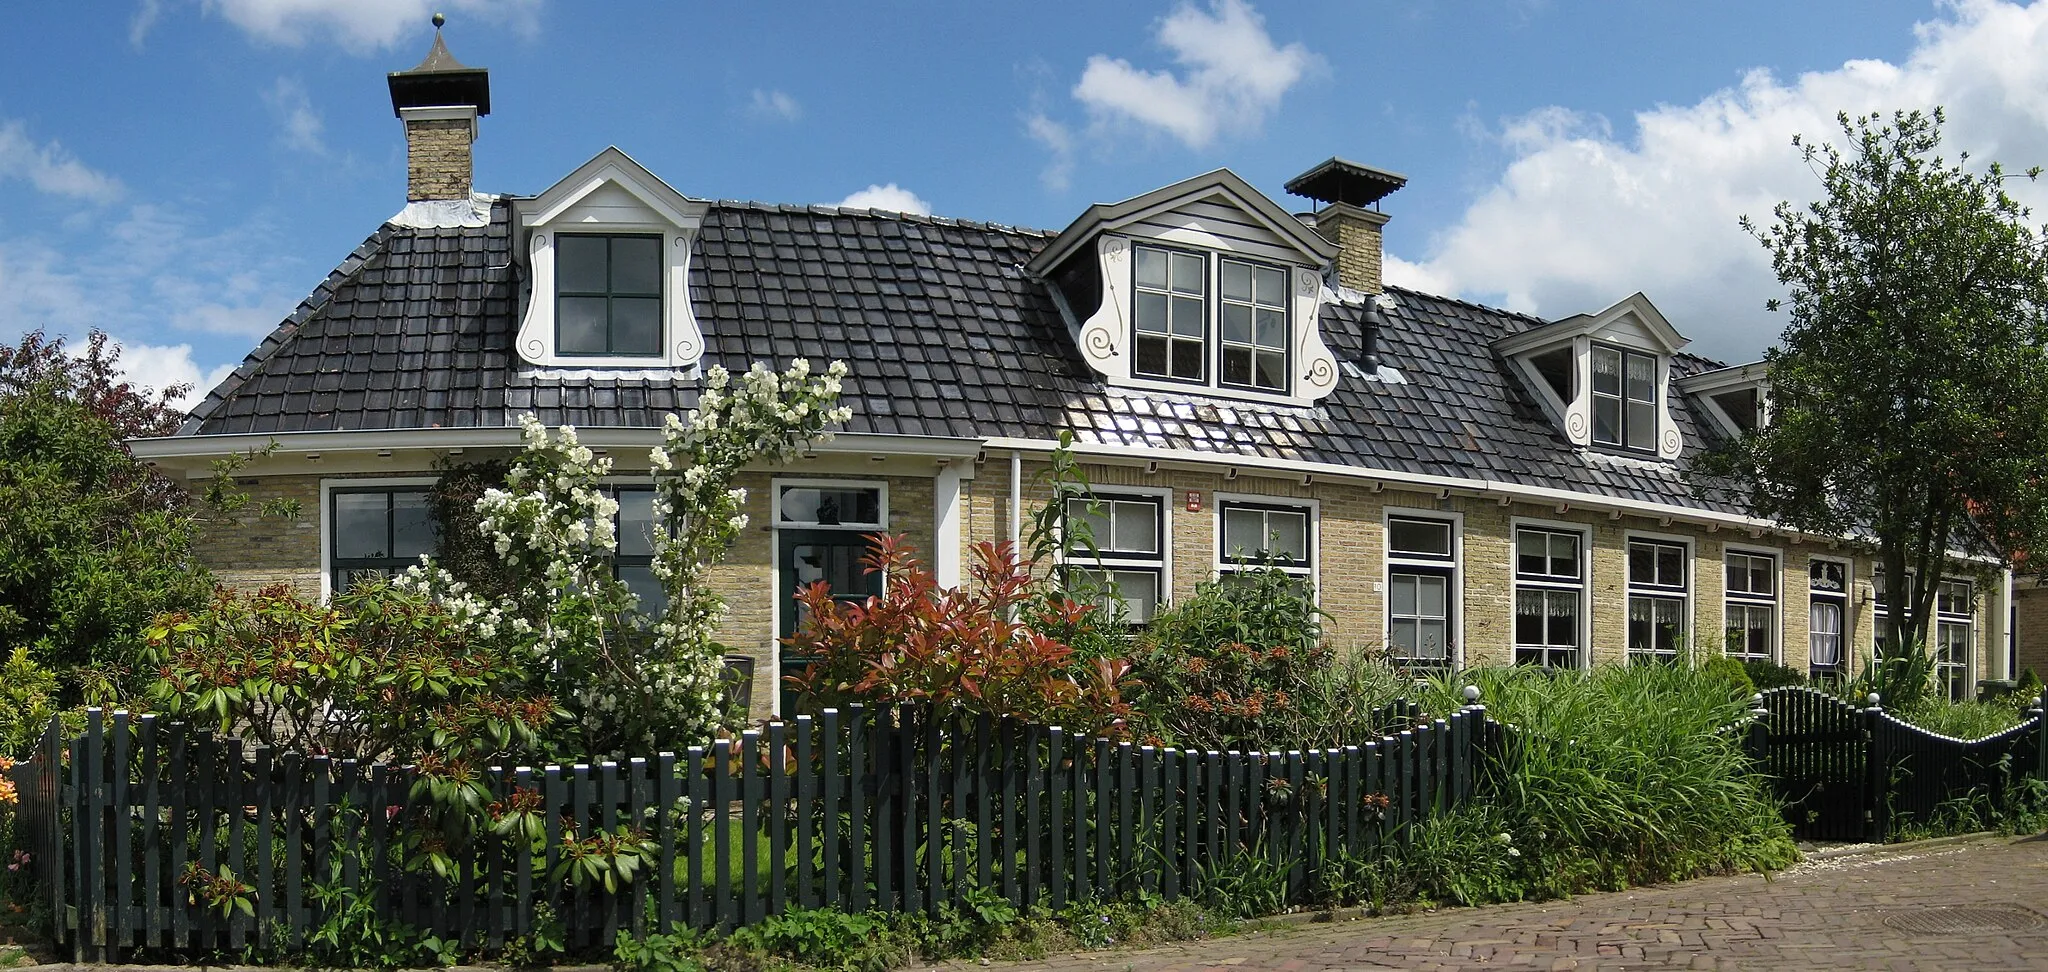 Photo showing: Four houses in Grou, a village in the Dutch province of Fryslân.